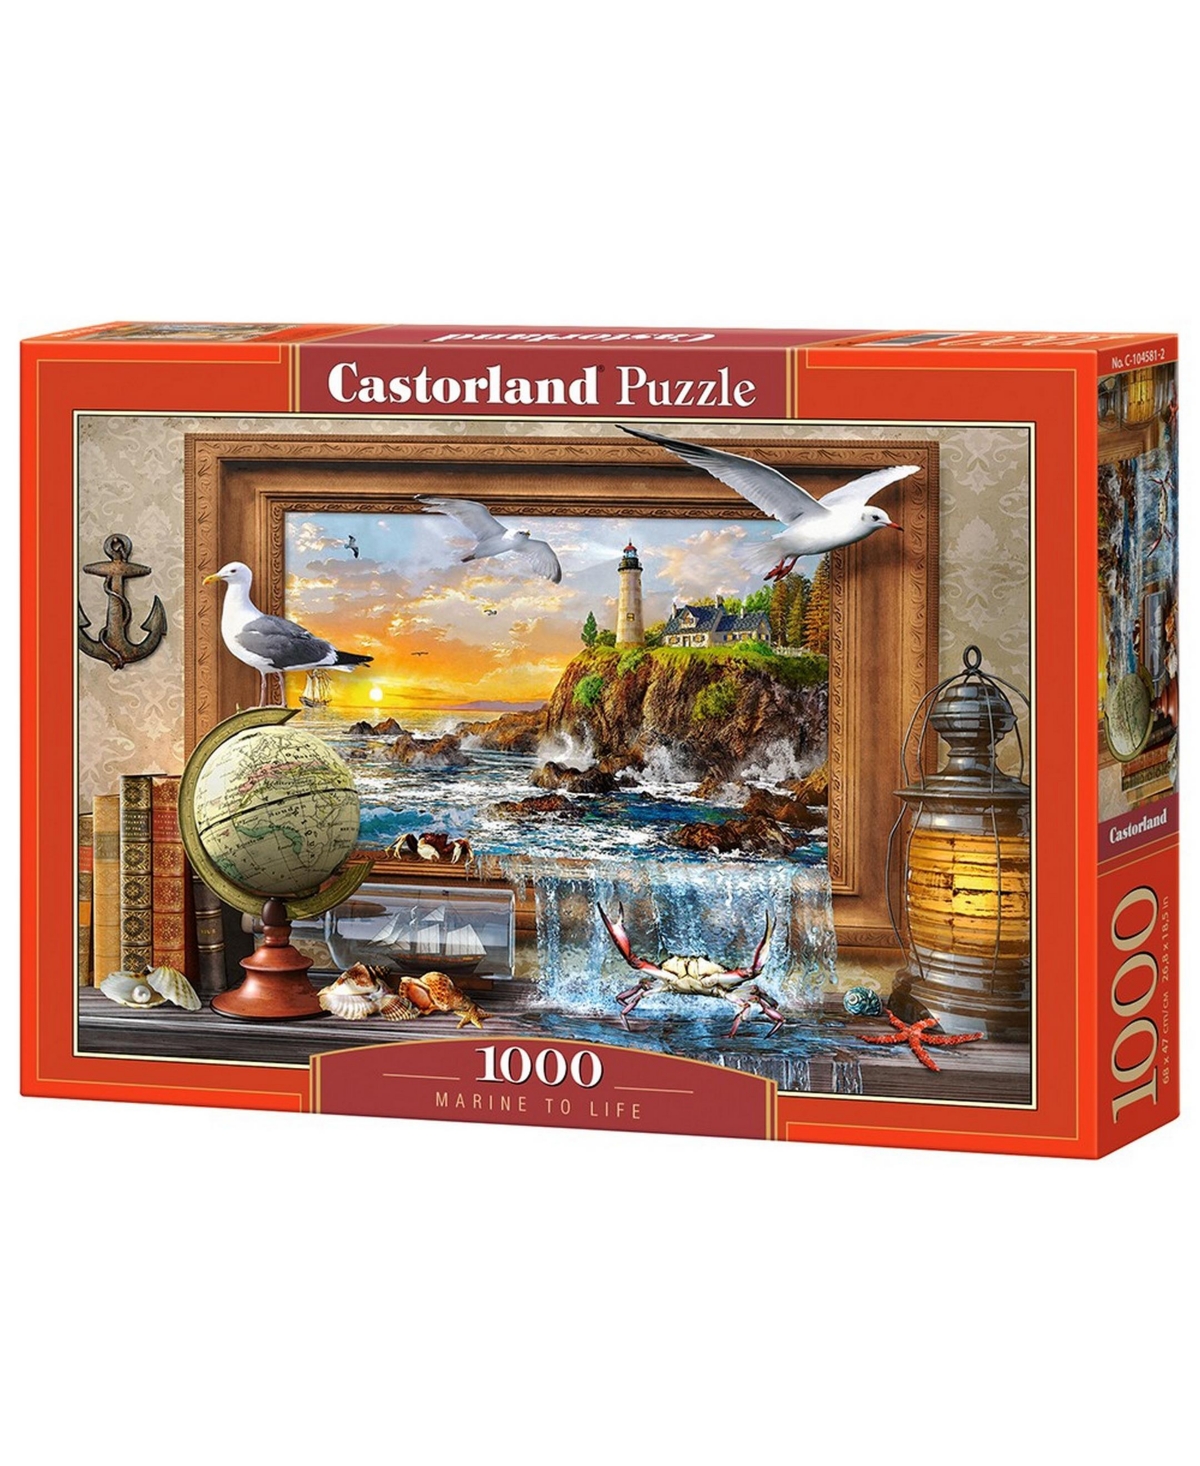 Castorland Marine To Life Jigsaw Puzzle Set, 1000 Piece In Multicolor